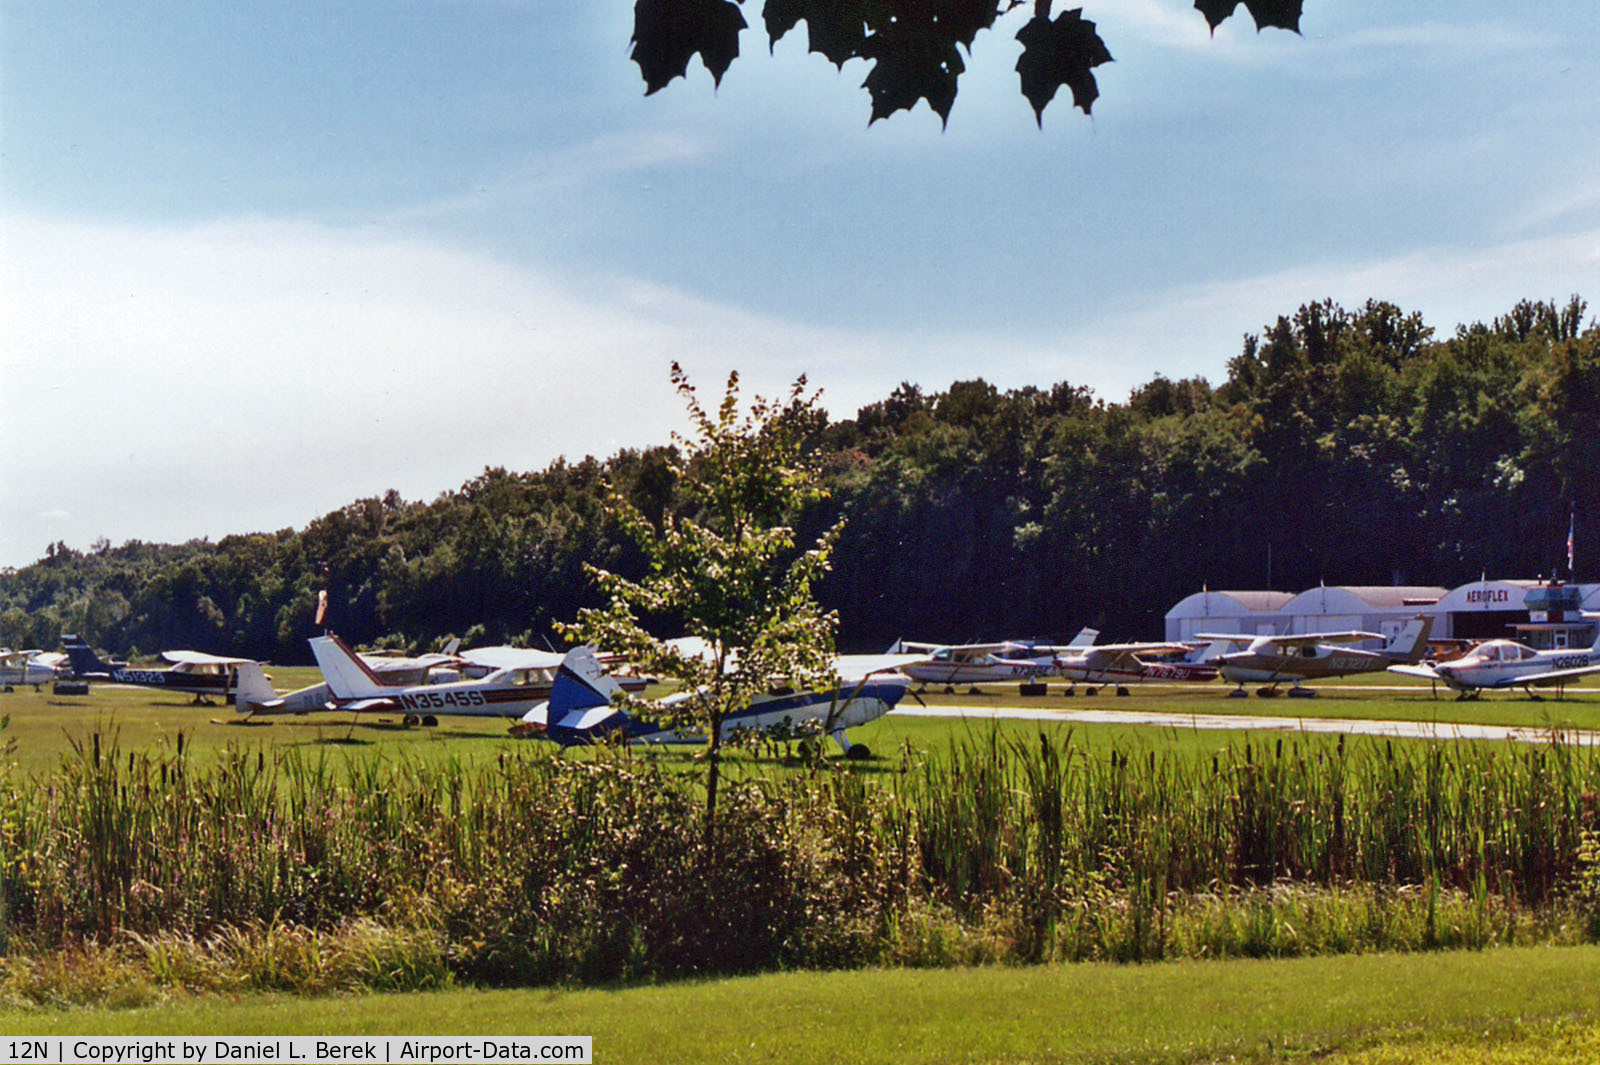 Aeroflex-andover Airport (12N) - Beautiful Aeroflex-Andover Airport is located in the middle of a state park in Sussex County, NJ.